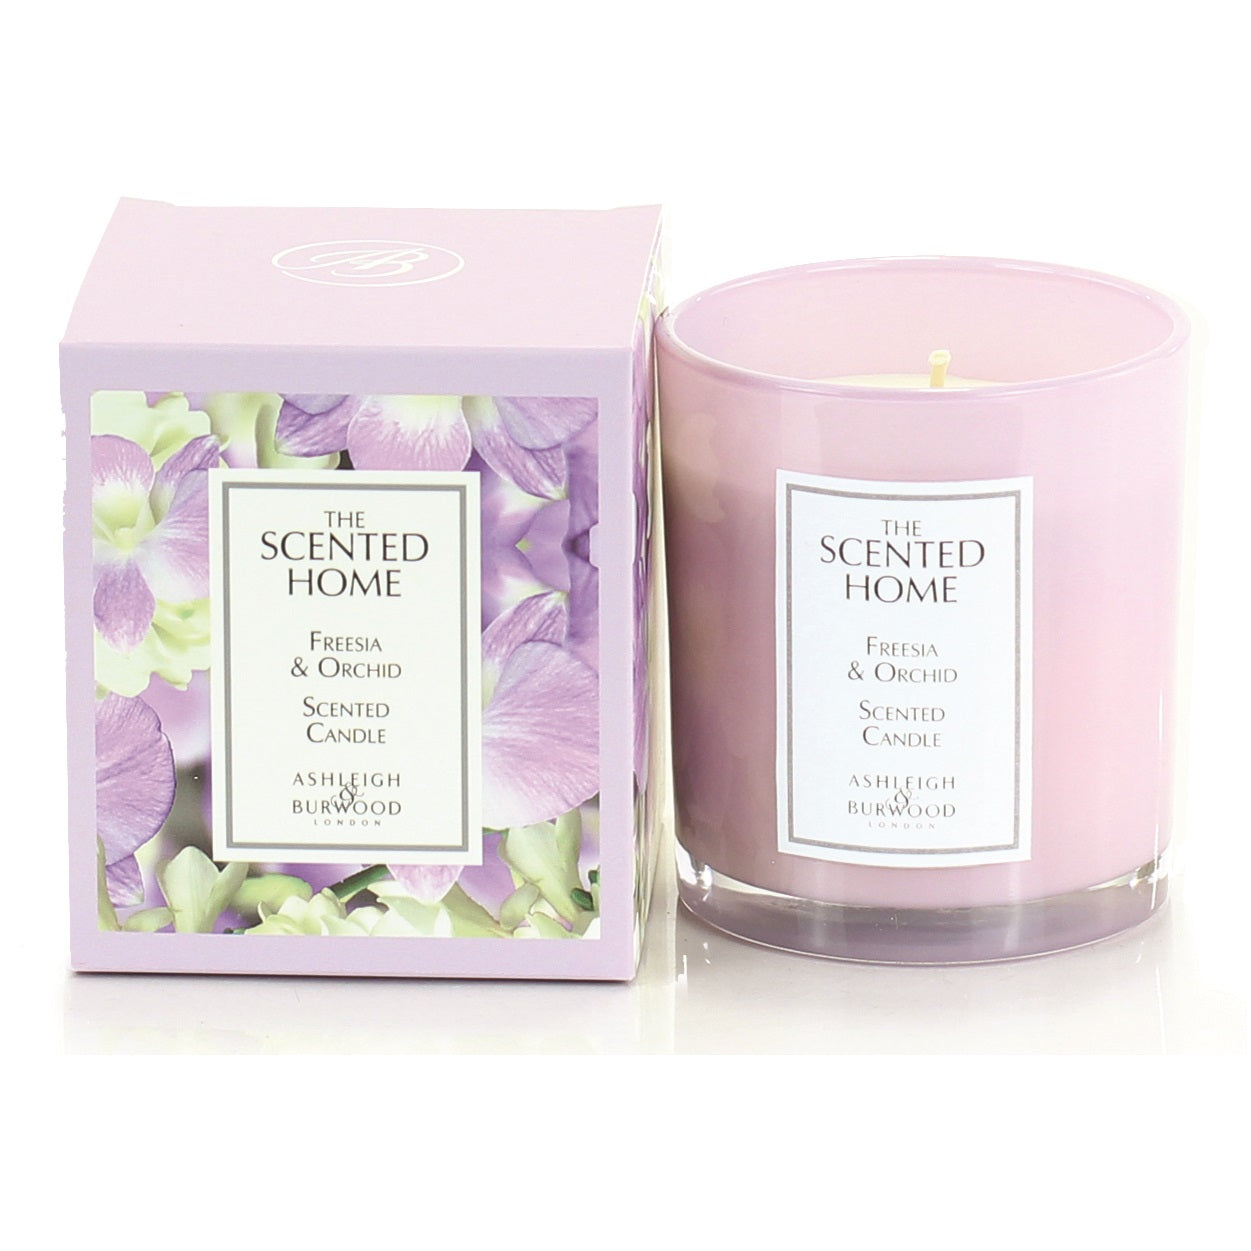 BOXED GLASS CANDLE 225G FREESIA & ORCHID - SCENTED HOME